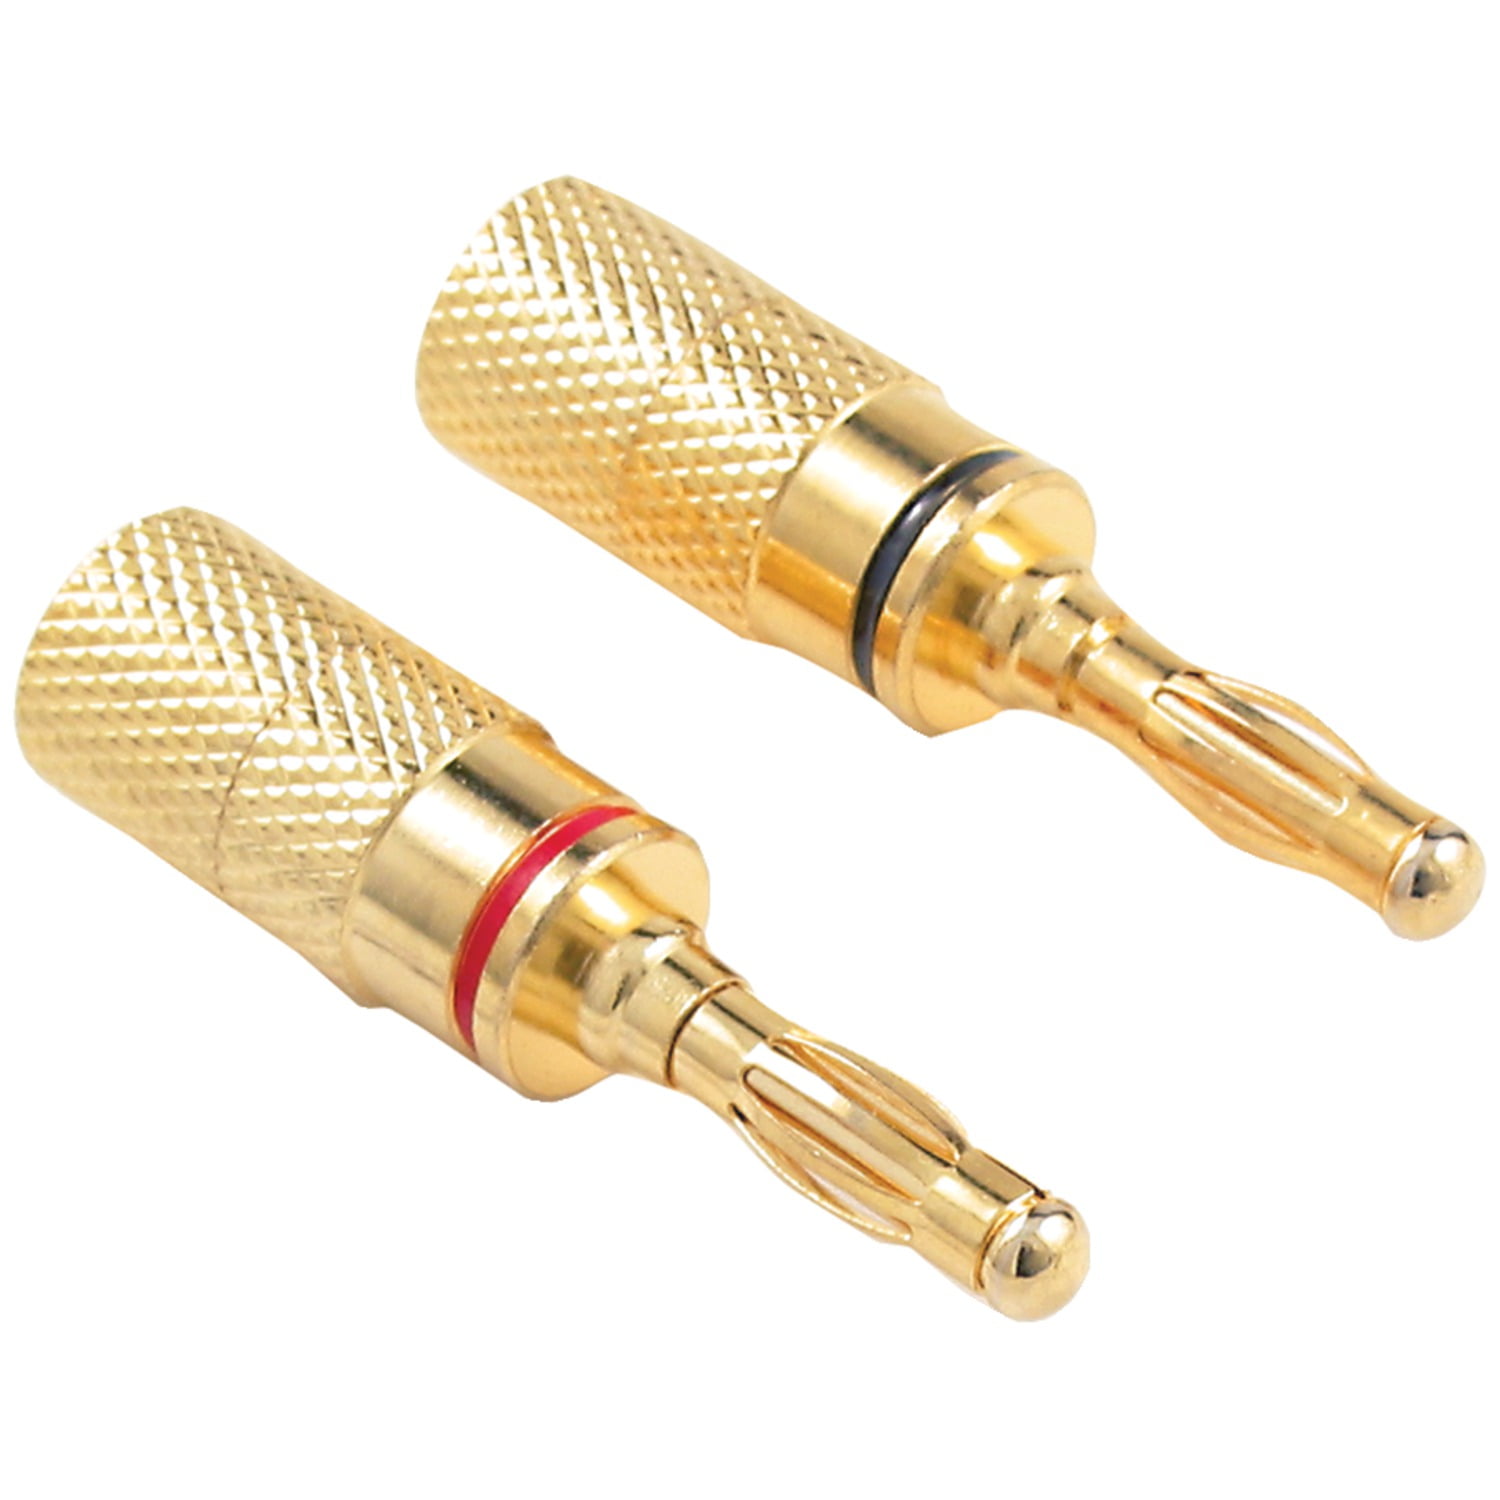 Pro-Wire IW-4PLUG Gold-Plated Screw-on Banana Plugs, 4 pk - Walmart.com What Wire Goes To Gold Screw